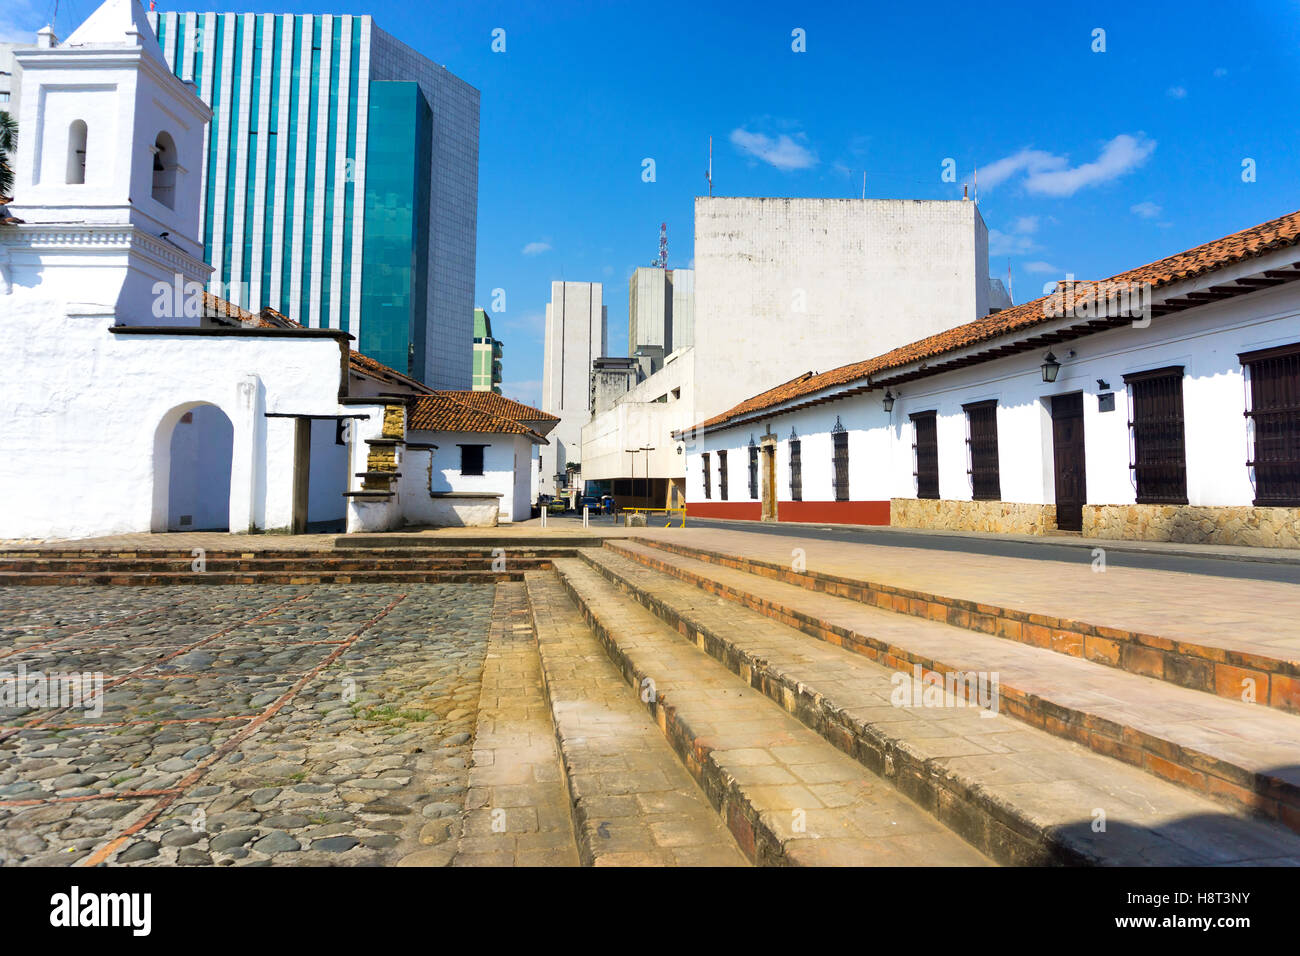 View of the historic La Merced church in Cali, Colombia with modern buildings in the background Stock Photo